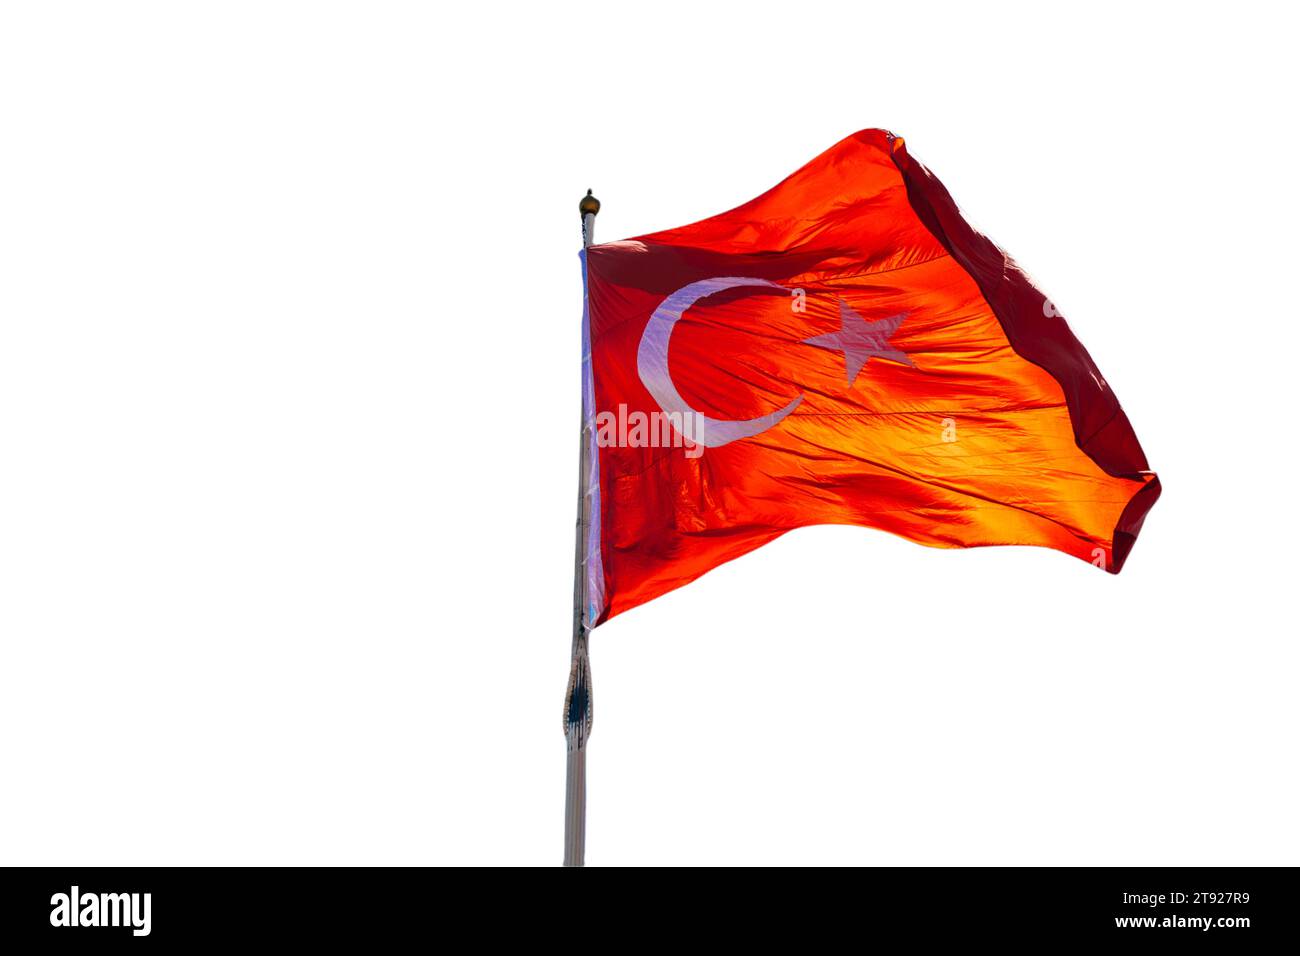 National Flag Republic of Turkey. White crescent moon and star on red turkish flag Stock Photo